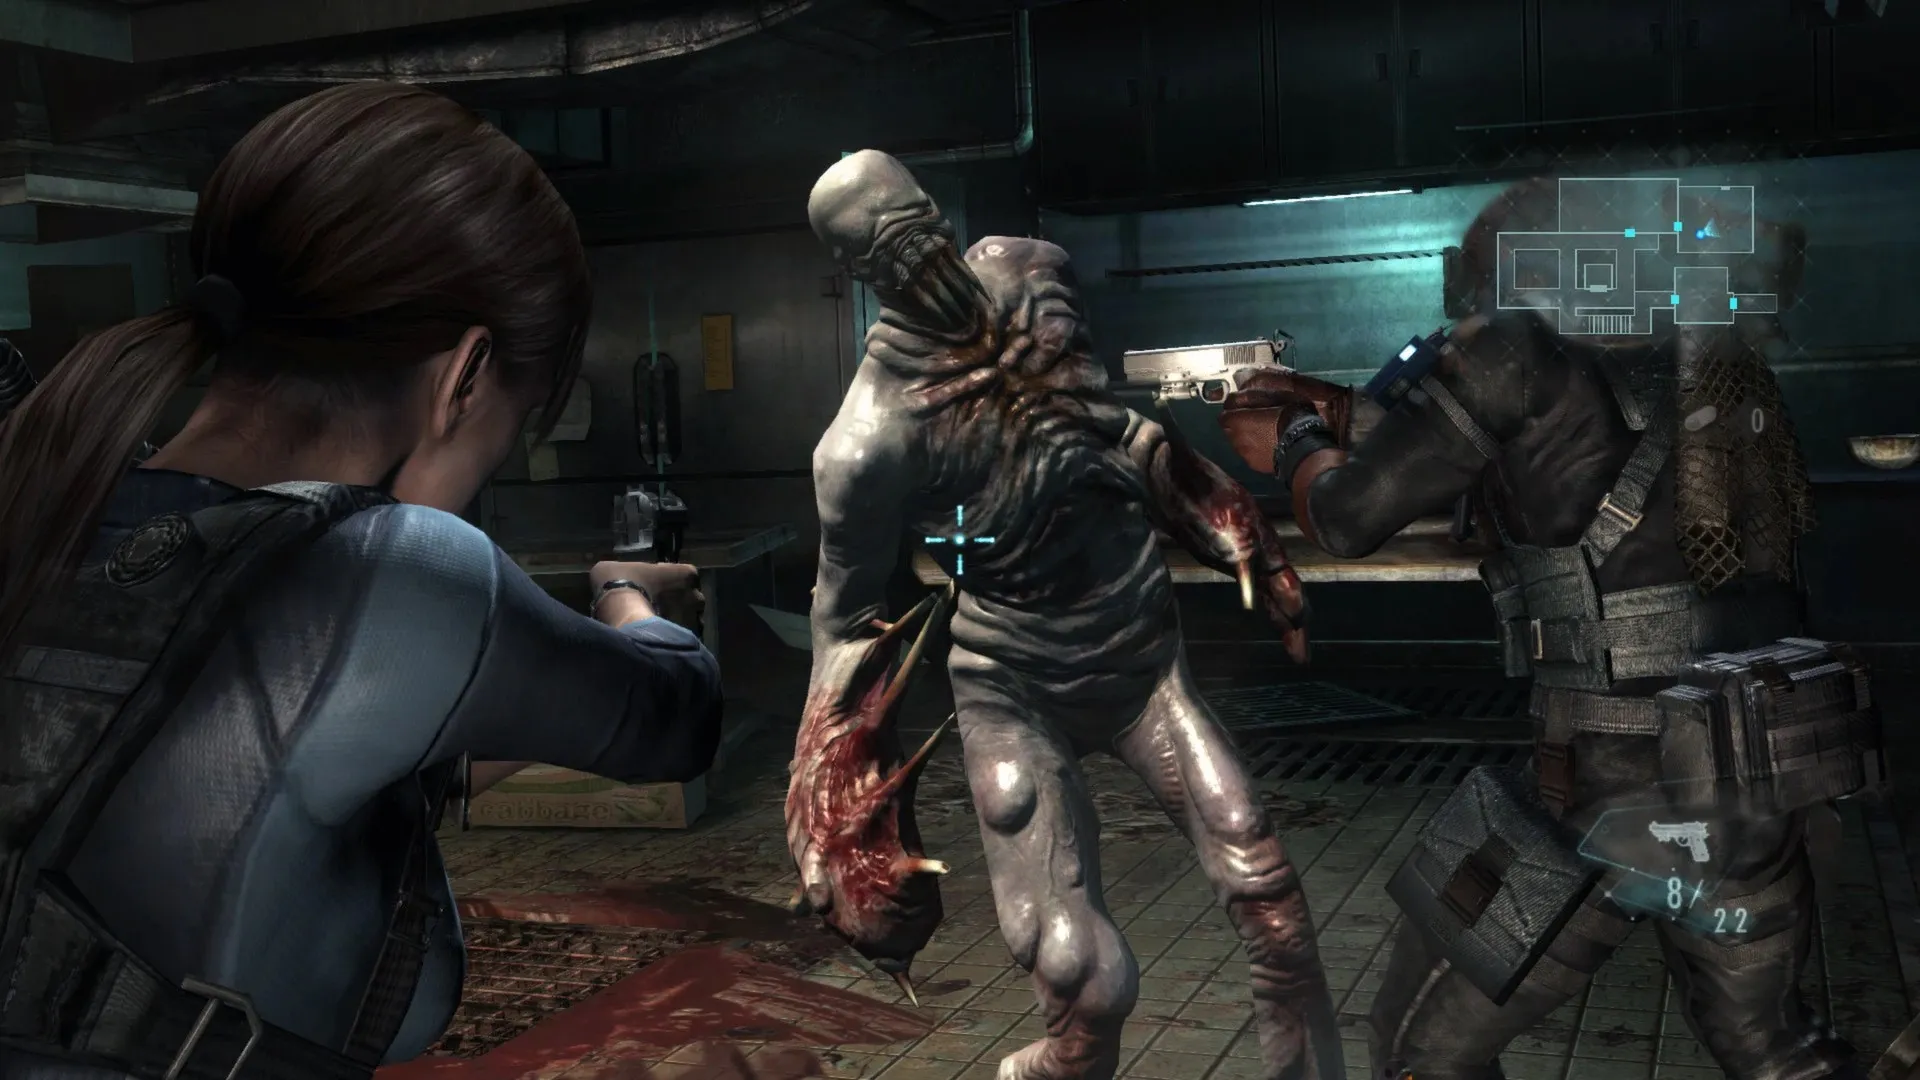 The 'Resident Evil: Revelations' Games Are Coming To The Nintendo Switch  Later This Month